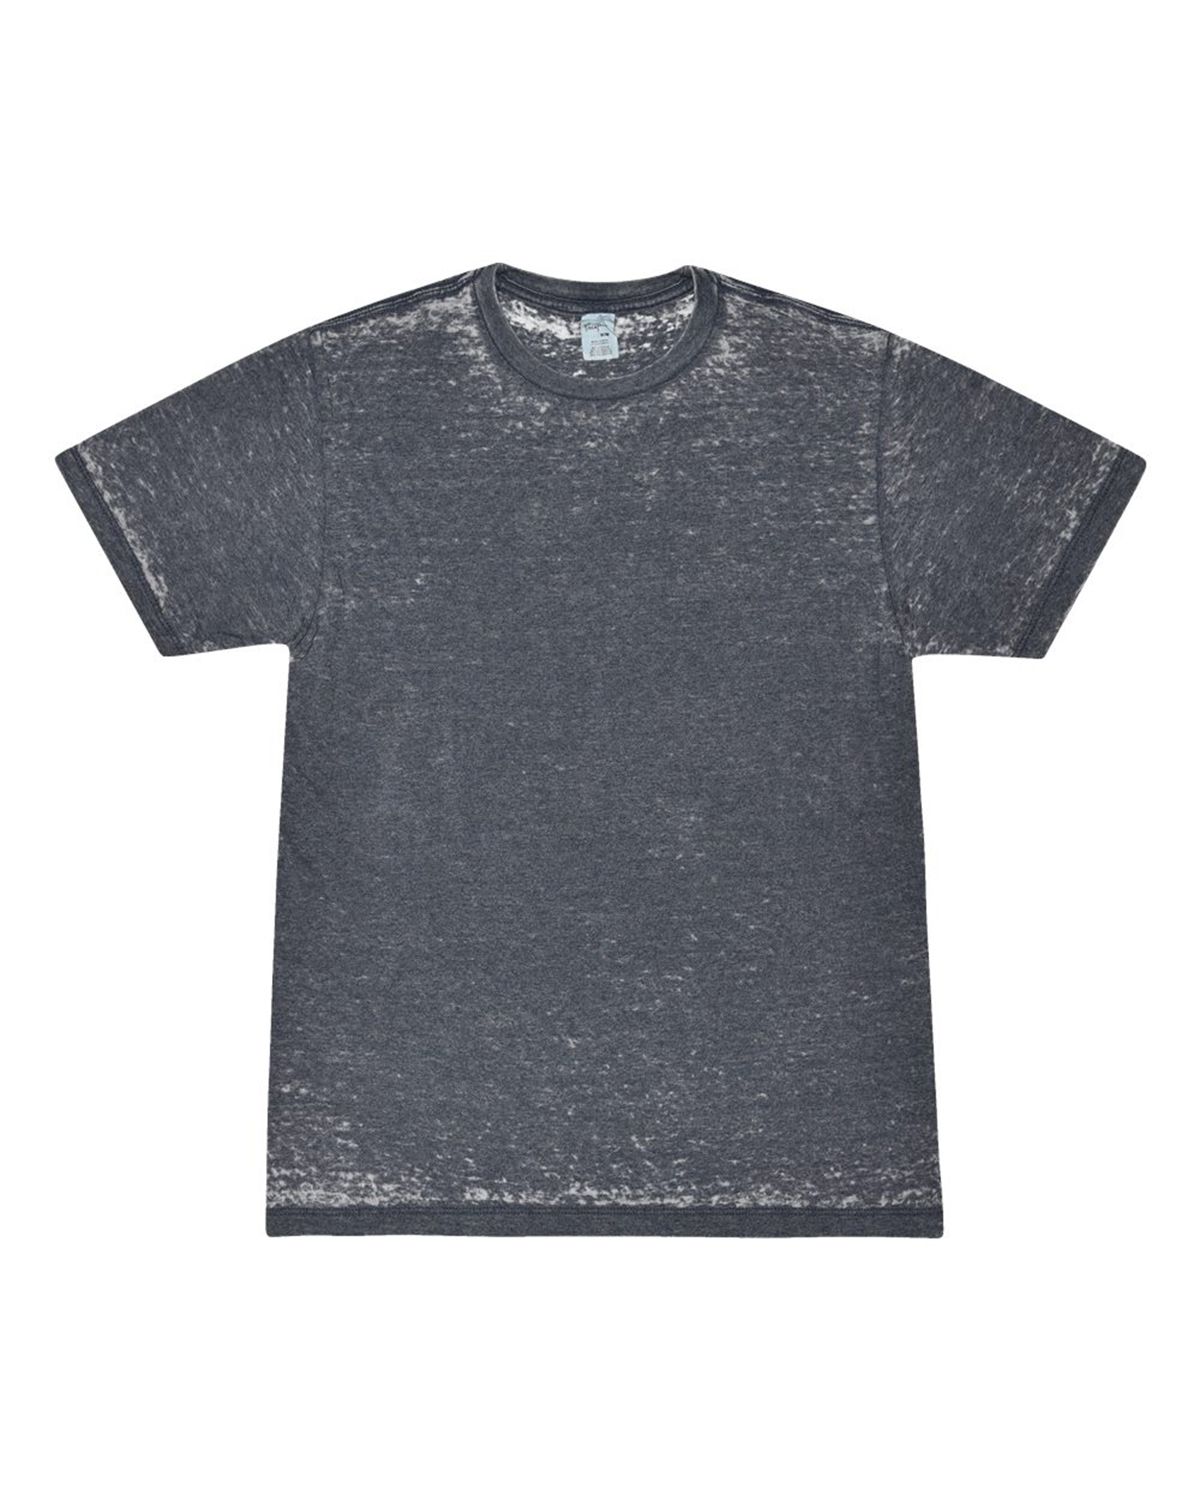 Colortone 1350 Acid Wash Burnout T-Shirt - Free Shipping Available